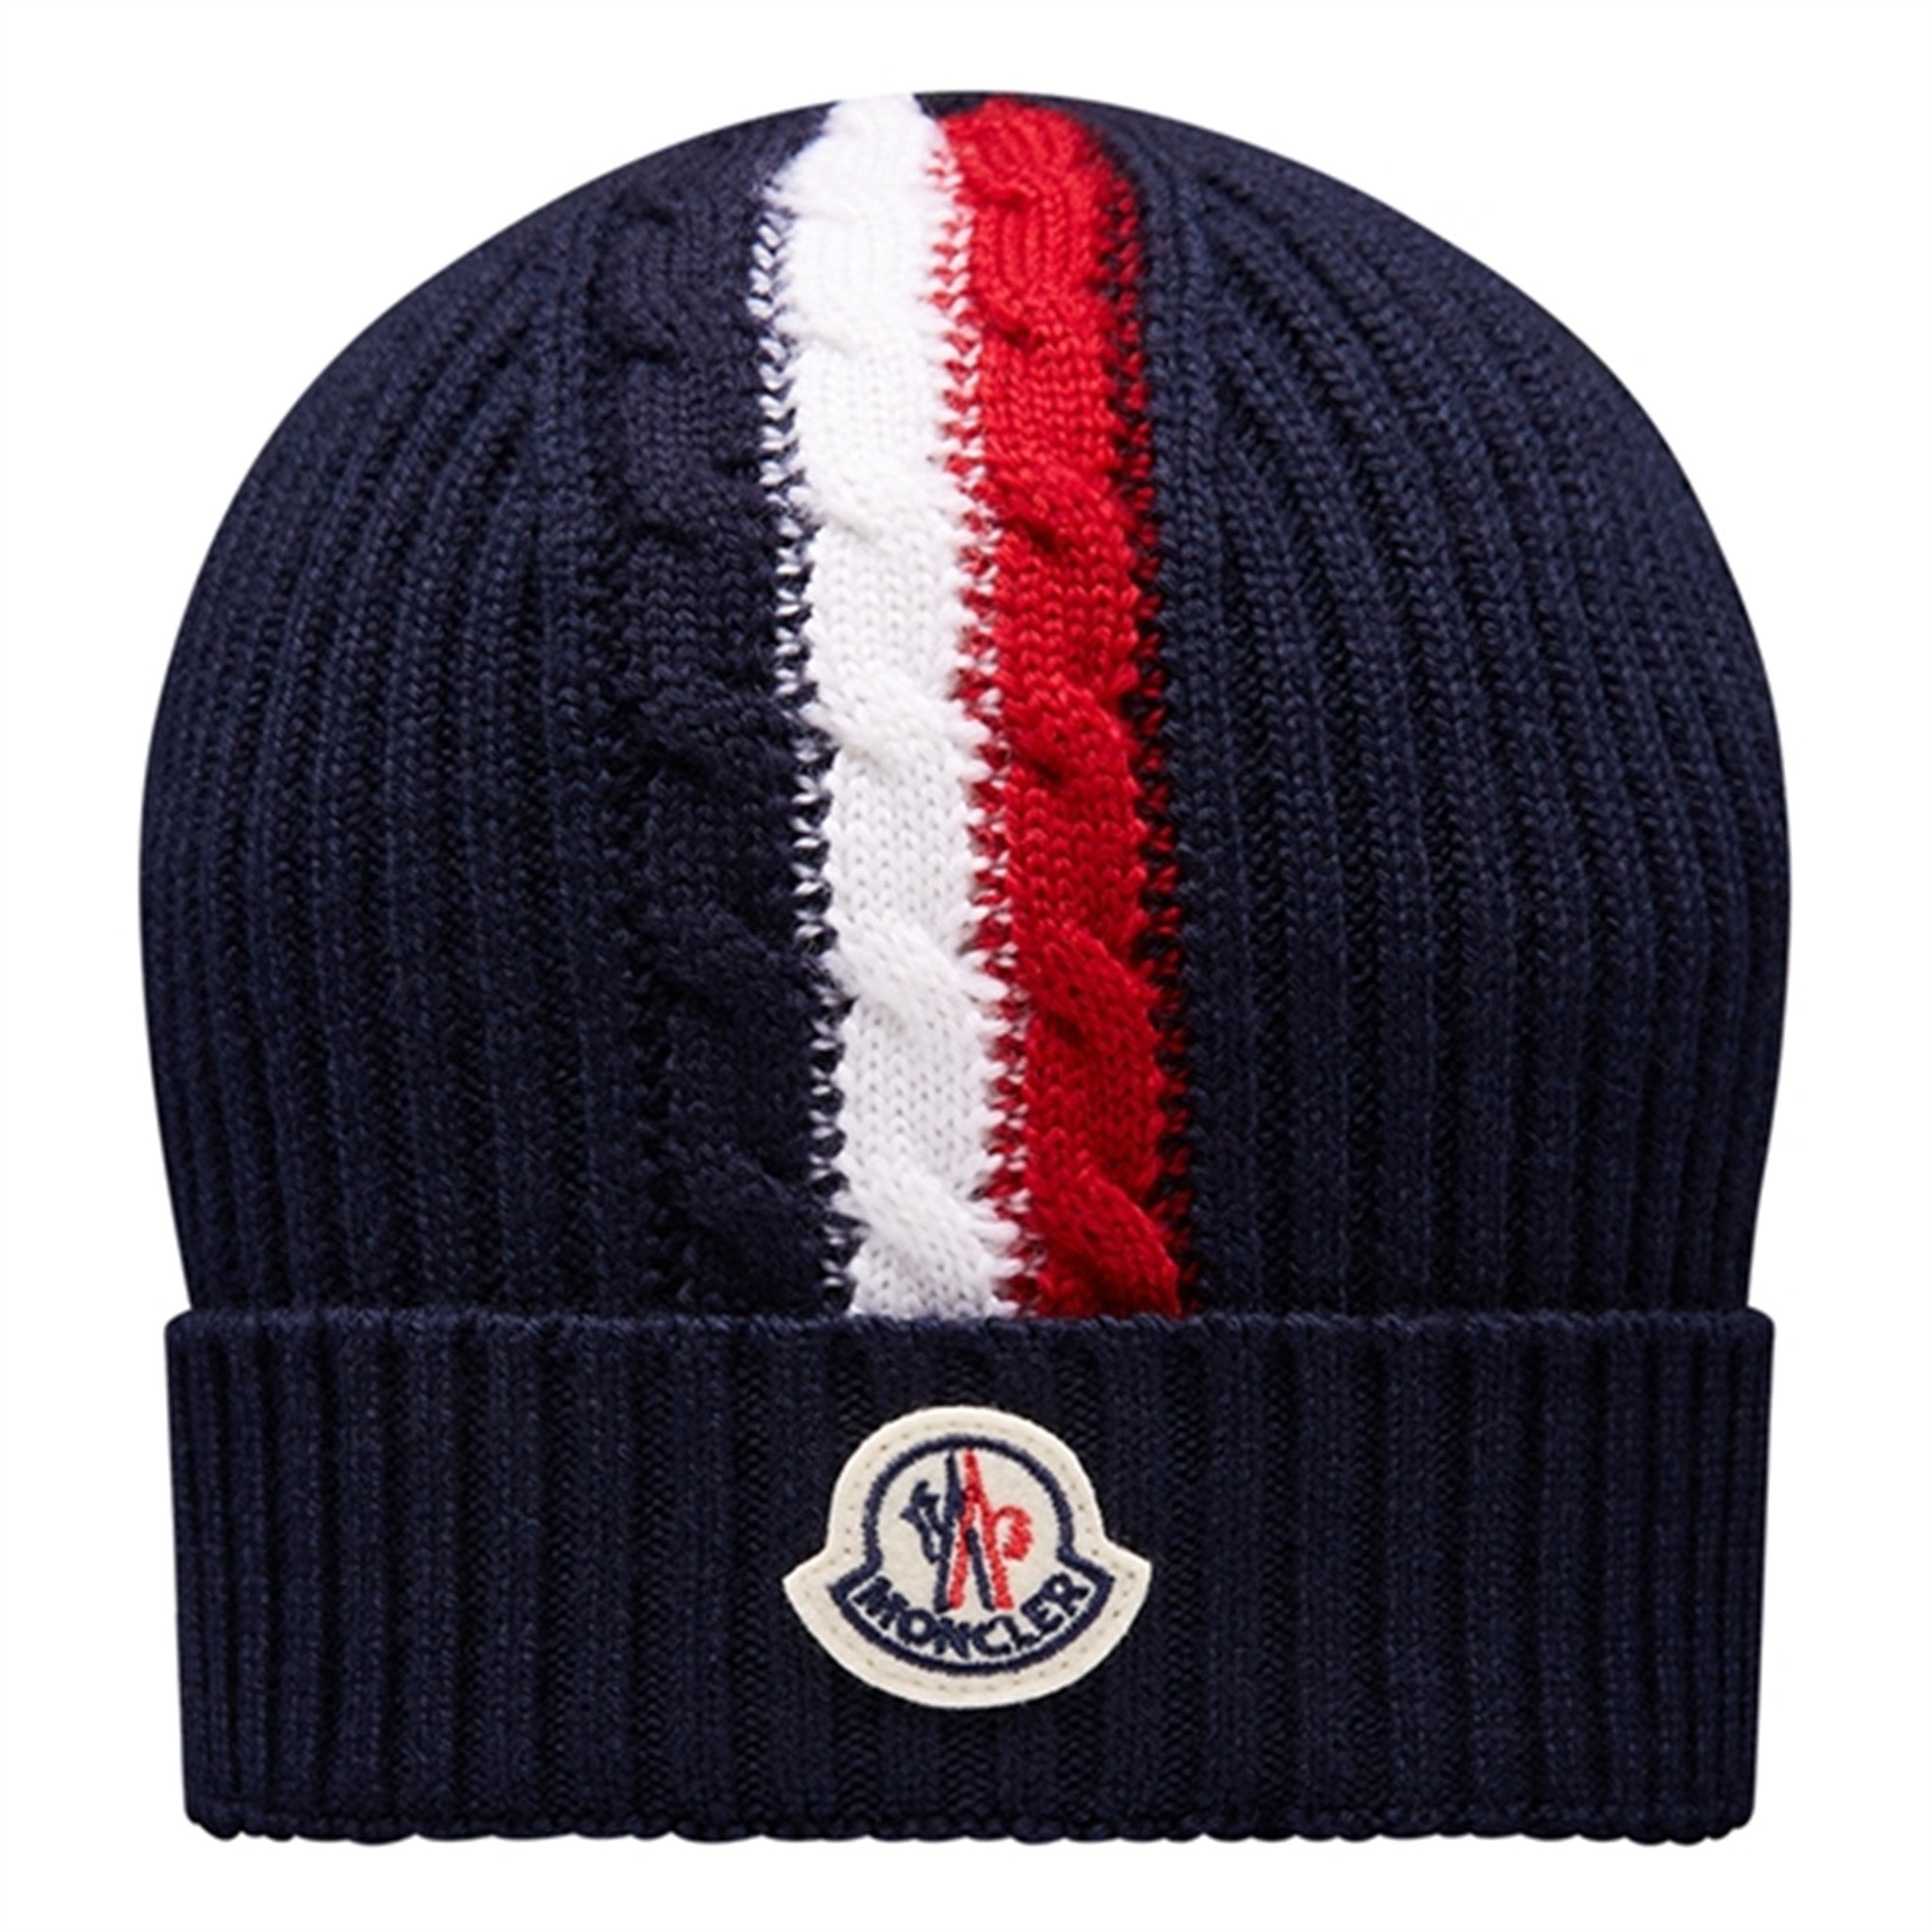 Moncler Berretto Tricot Hue Navy